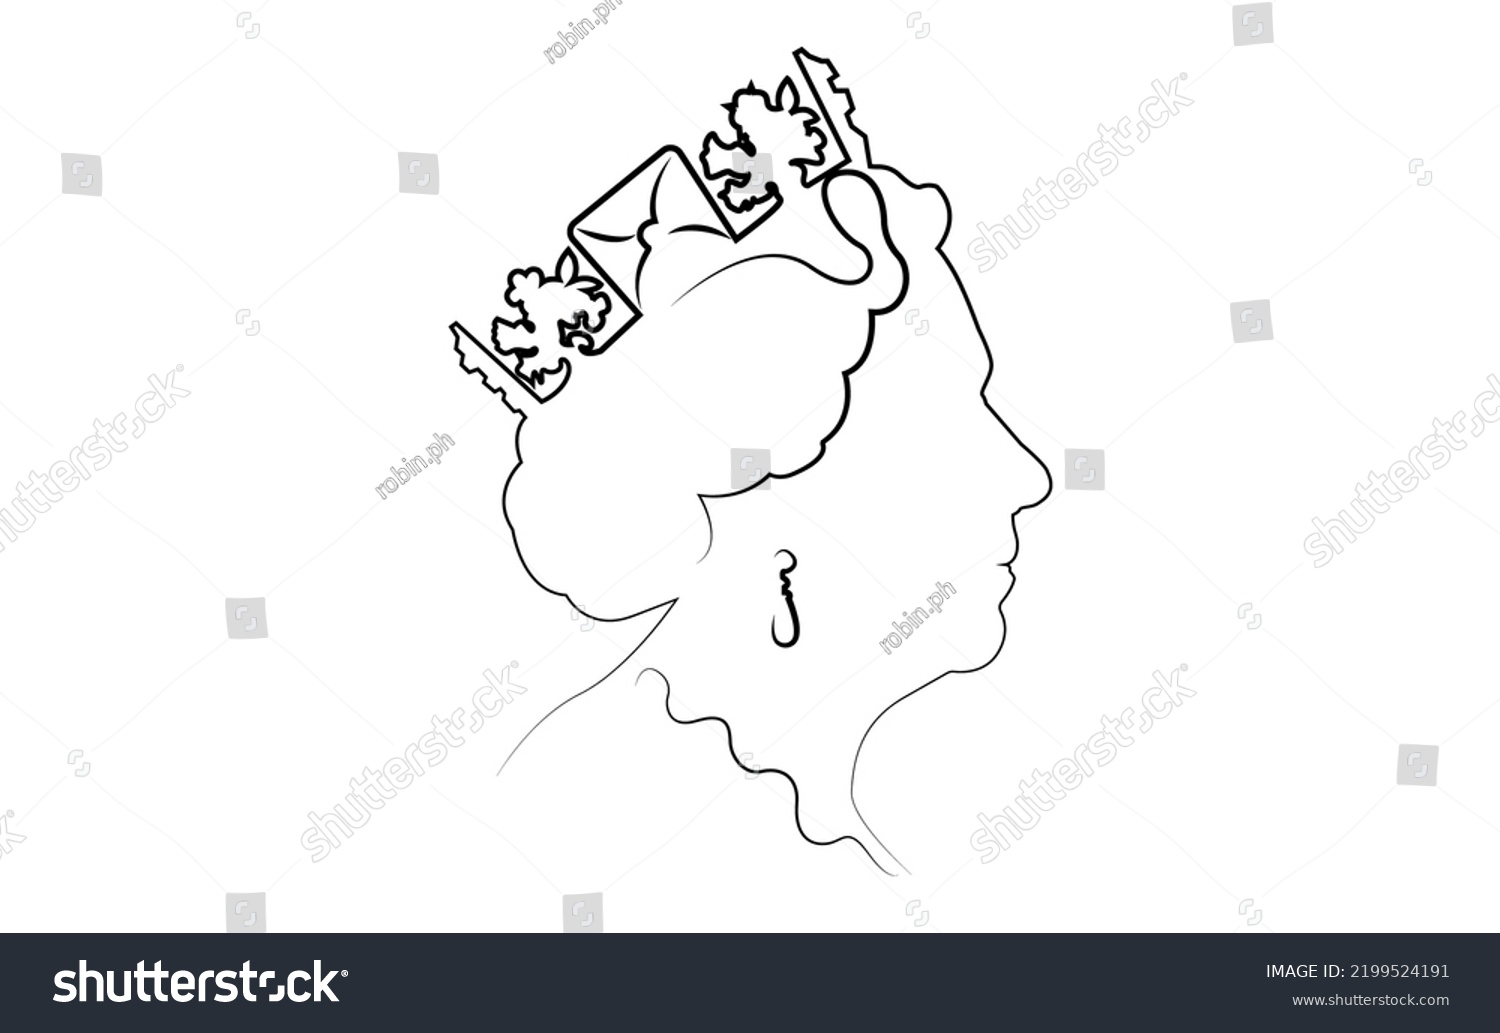 SVG of side profile of Queen Elizabeth. The Queen's in line art portrait, vector illustration isolated on white background  svg